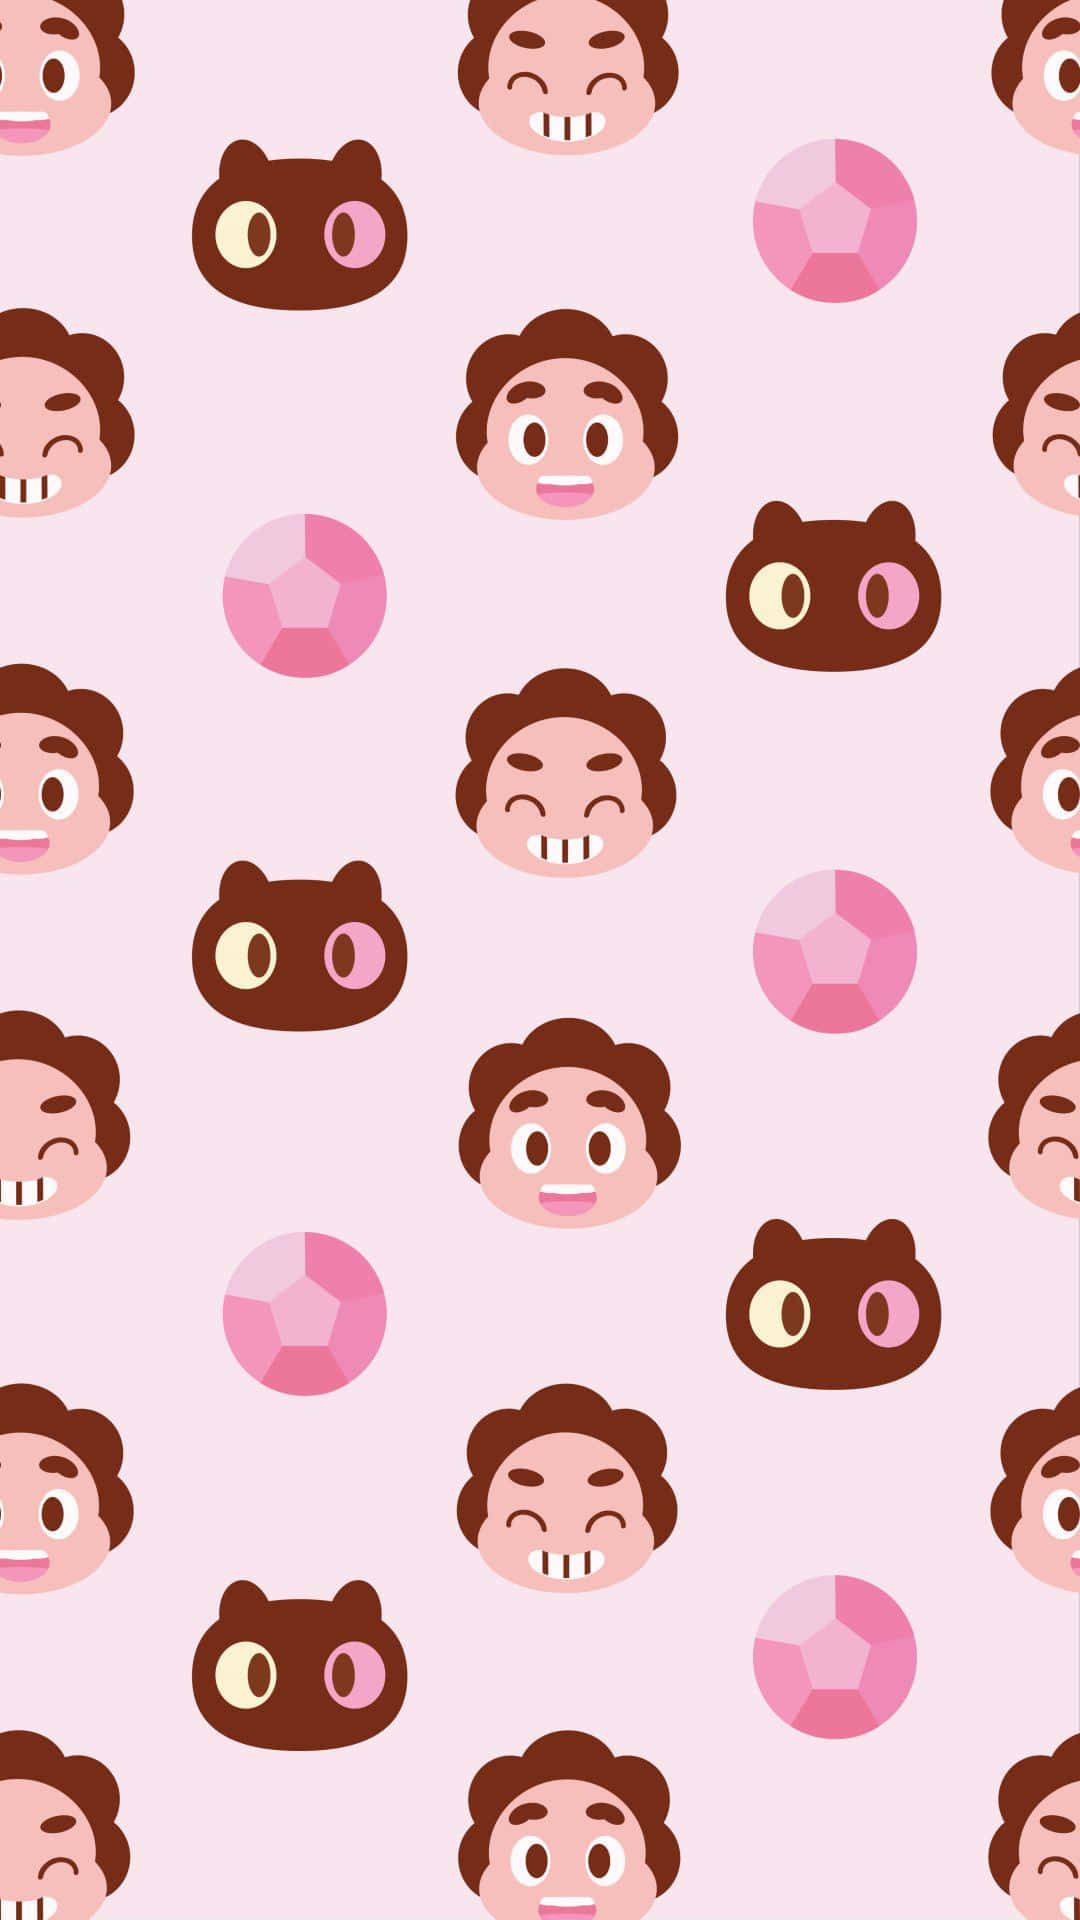 Show Your Support for Steven Universe with this Eye-Catching Phone Design Wallpaper